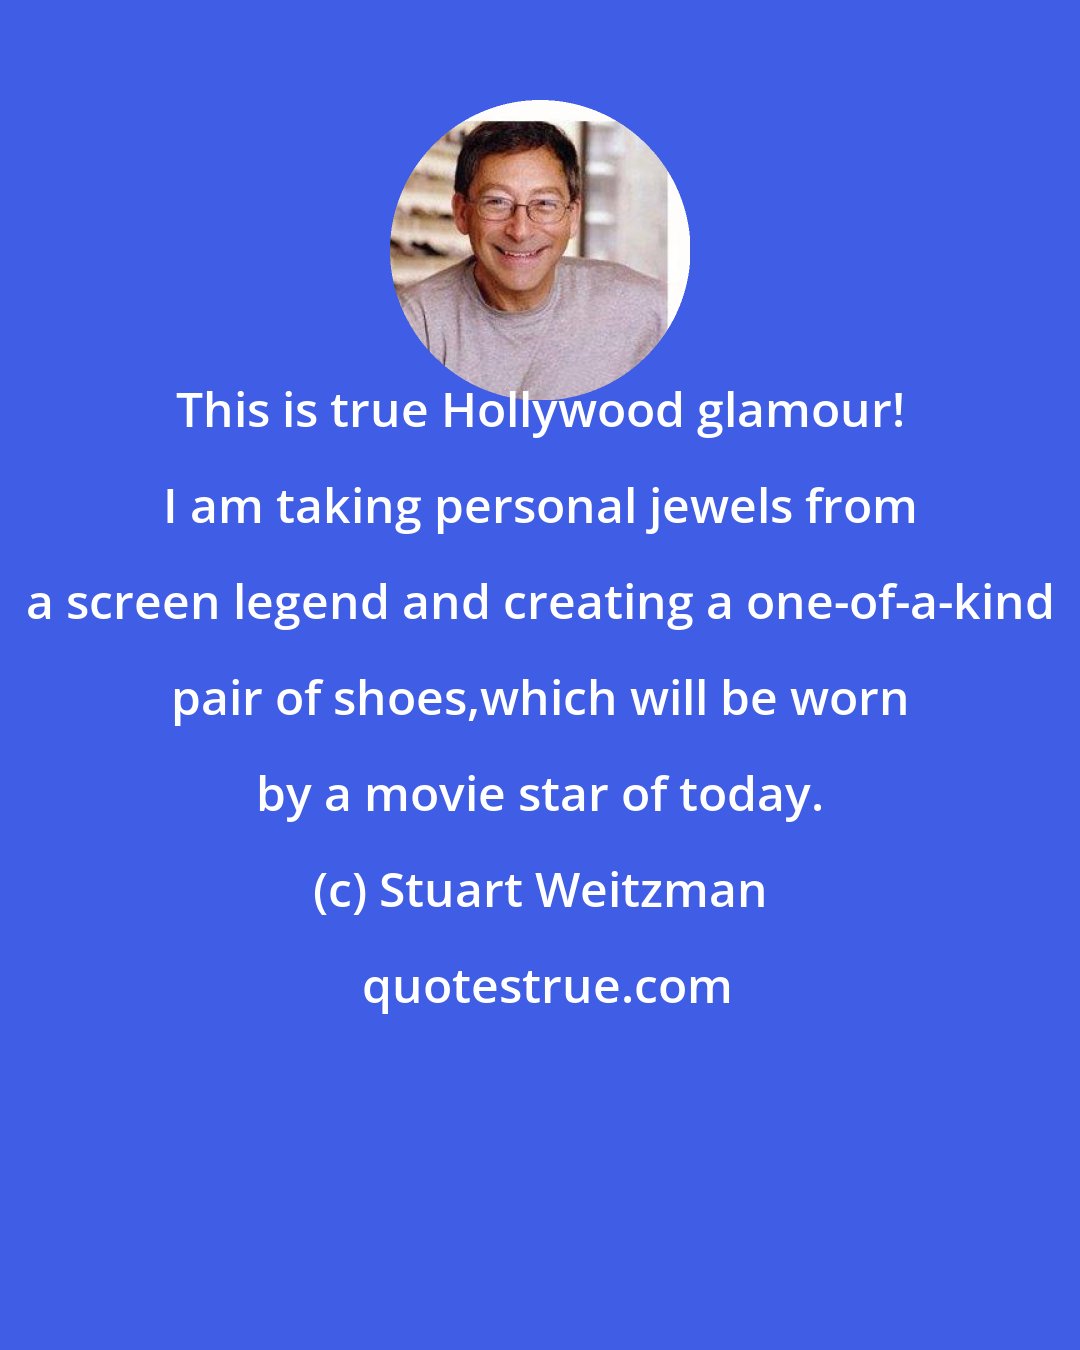 Stuart Weitzman: This is true Hollywood glamour! I am taking personal jewels from a screen legend and creating a one-of-a-kind pair of shoes,which will be worn by a movie star of today.